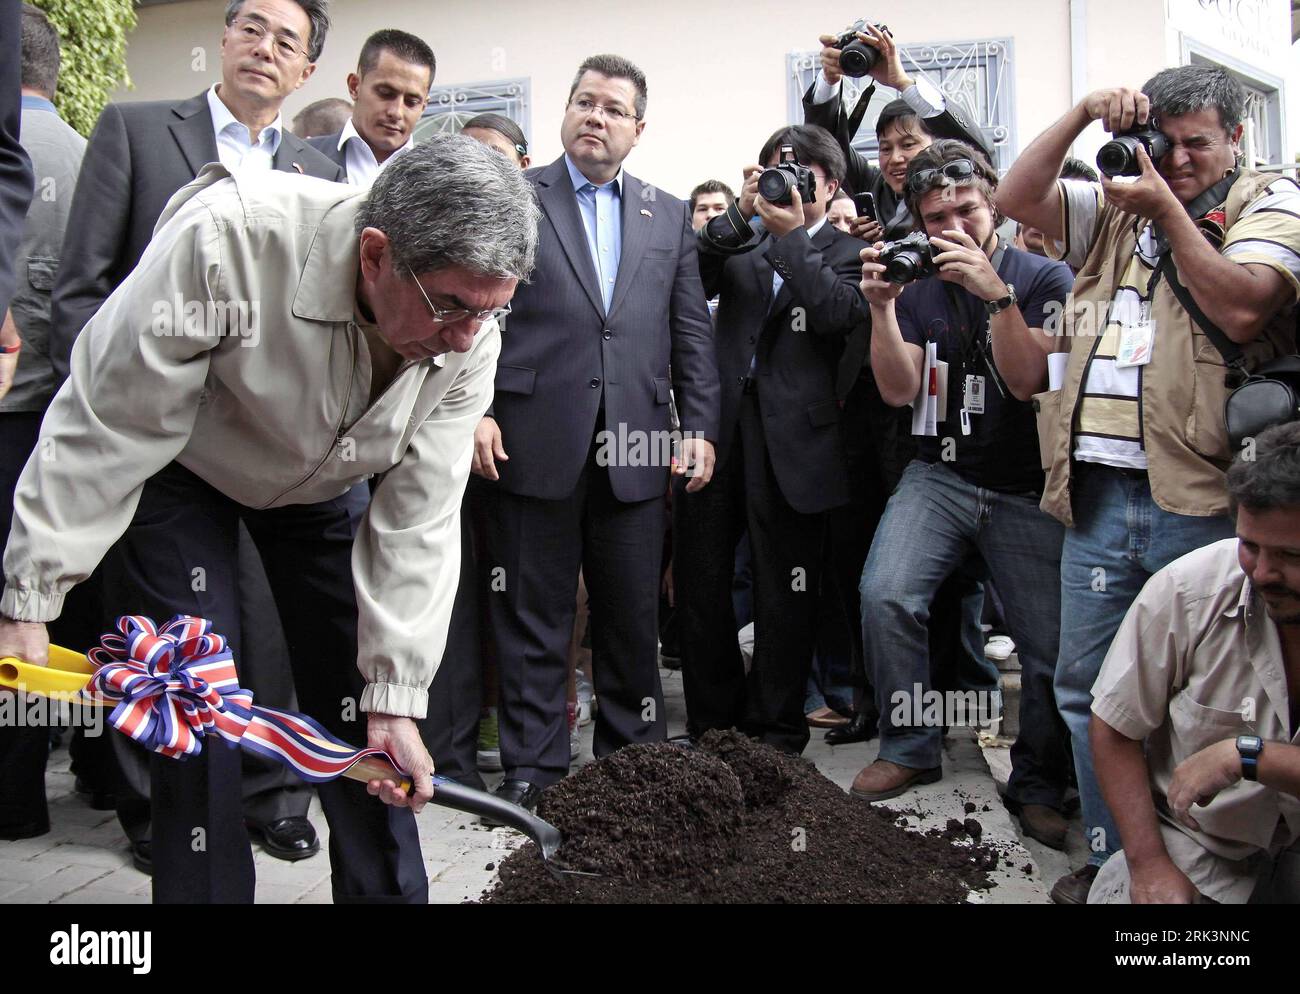 Bildnummer: 53539592  Datum: 17.10.2009  Copyright: imago/Xinhua  SAN JOSE, Oct. 17, 2009 (Xinhua) -- Costa Rican President Oscar Arias (L) lays a foundation for the Chinatown in central San Jose, Oct. 17, 2009. Beijing Mayor Guo Jinlong also attended the ceremony to lay the foundation for Chinatown. (Xinhua/Esteban Datos)(zx) (1)COSTA RICA-SAN JOSE-CHINATOWN PUBLICATIONxNOTxINxCHN People Politik kbdig xsp 2009 quer    Bildnummer 53539592 Date 17 10 2009 Copyright Imago XINHUA San Jose OCT 17 2009 XINHUA Costa Rican President Oscar Arias l Lays a Foundation for The China Town in Central San Jo Stock Photo